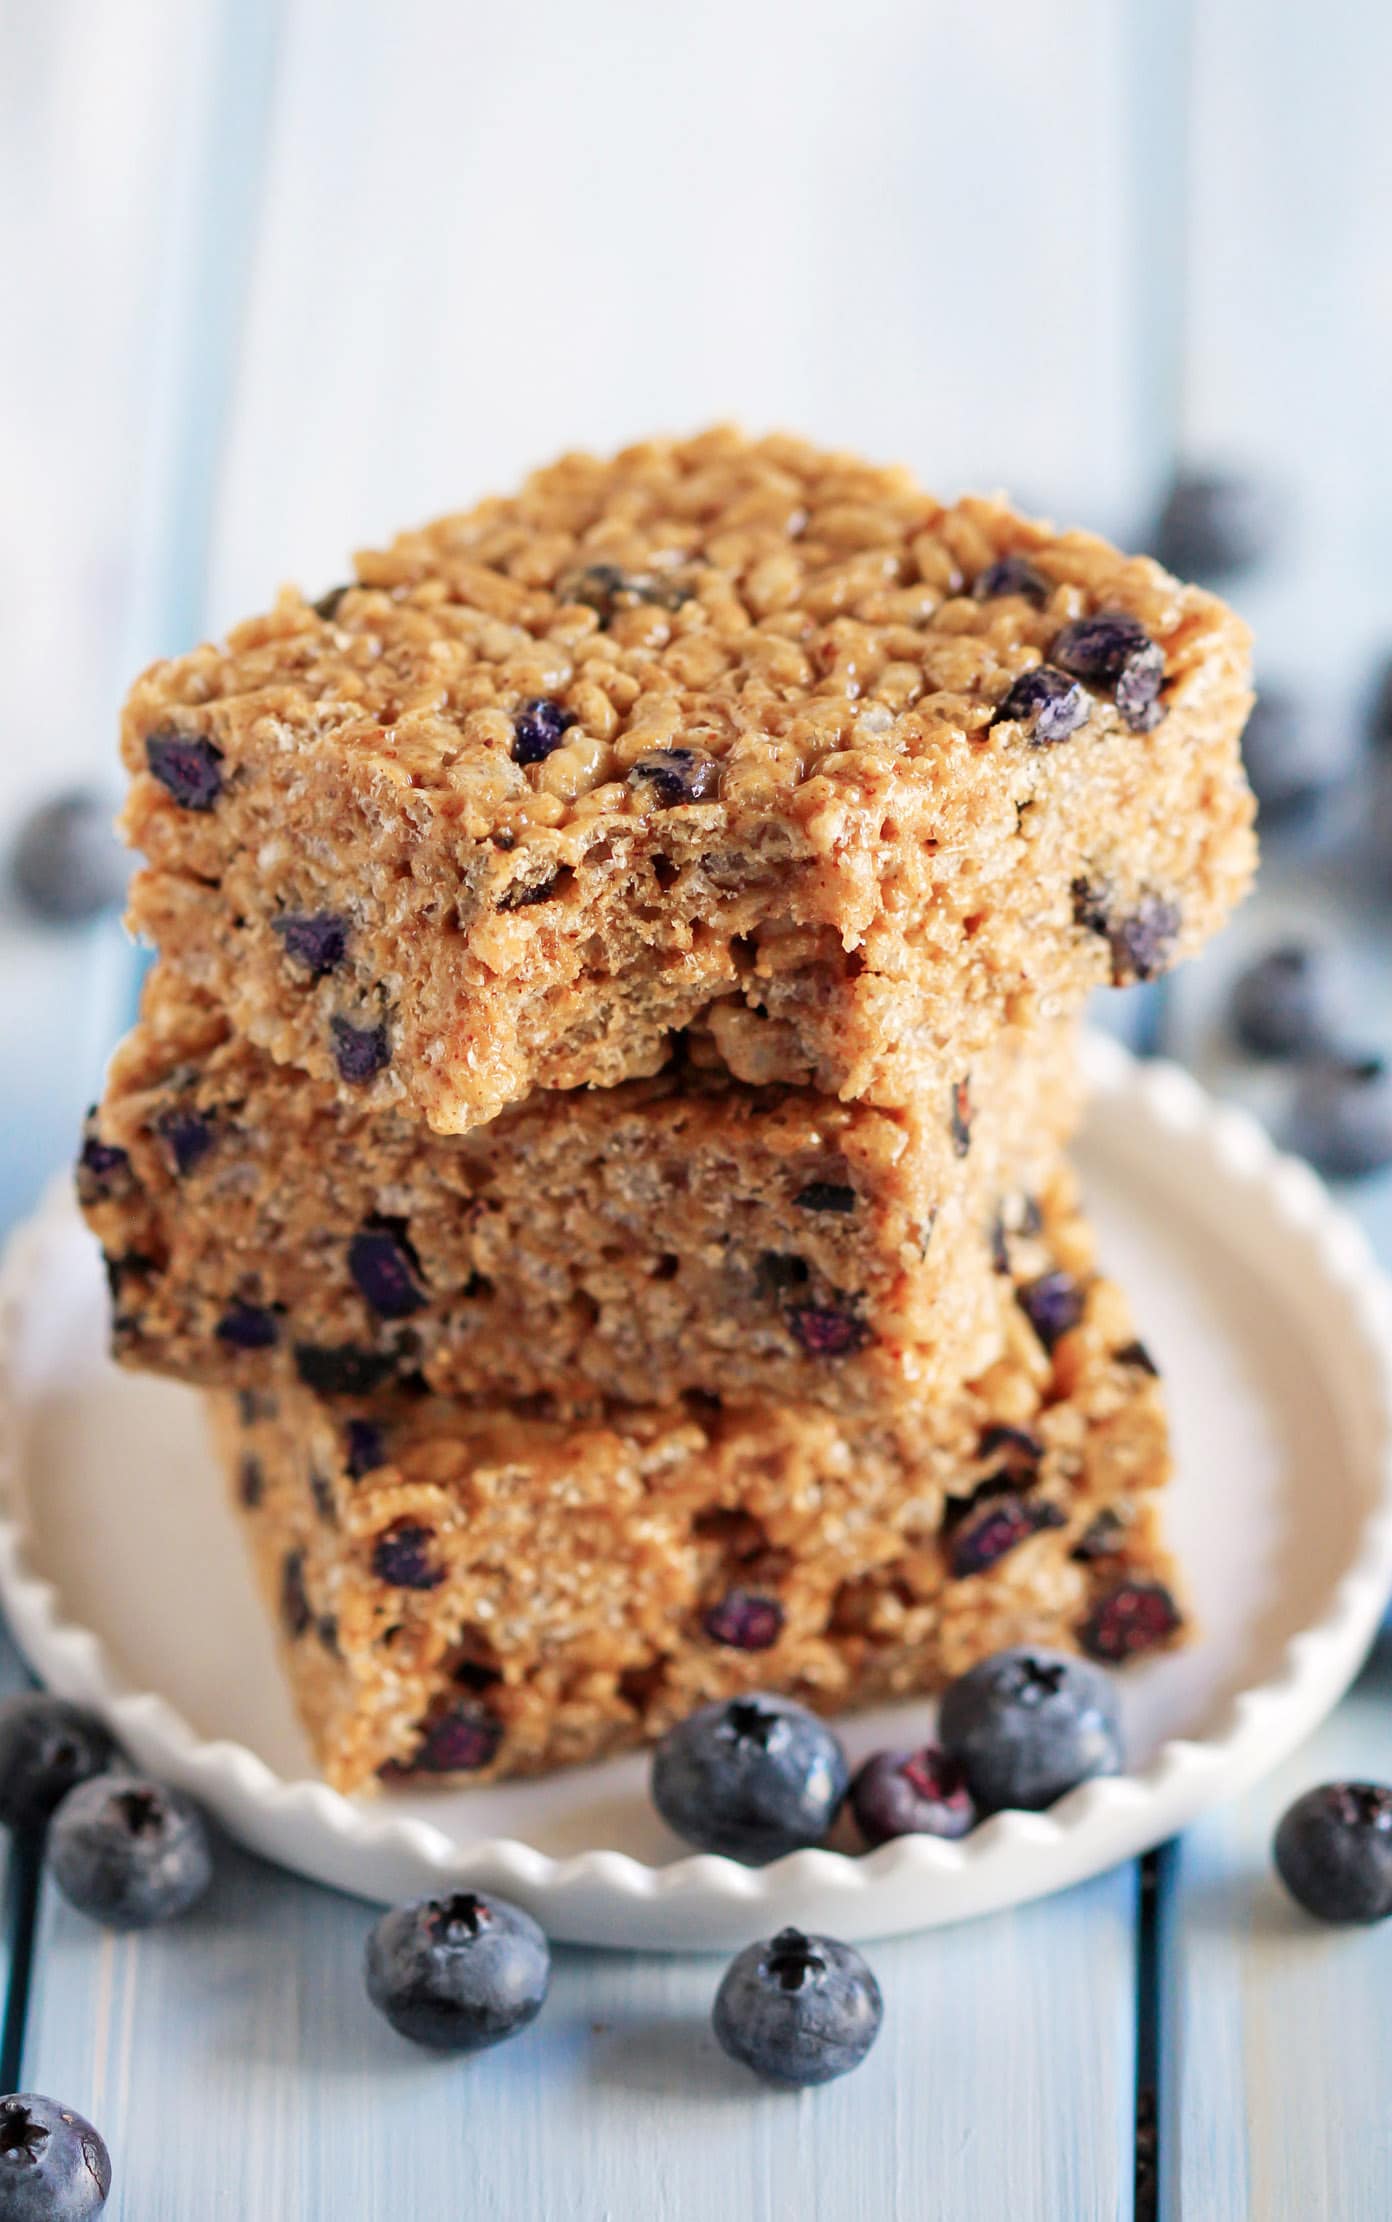 These Blueberry Bliss Krispy Treats are secretly healthy -- made with whole grain brown rice cereal, low glycemic raw honey, delicious almond butter, and a sprinkling of protein powder. It's crispy and chewy, but without the butter and sugary, high-fructose corn-syrup-laden marshmallows.